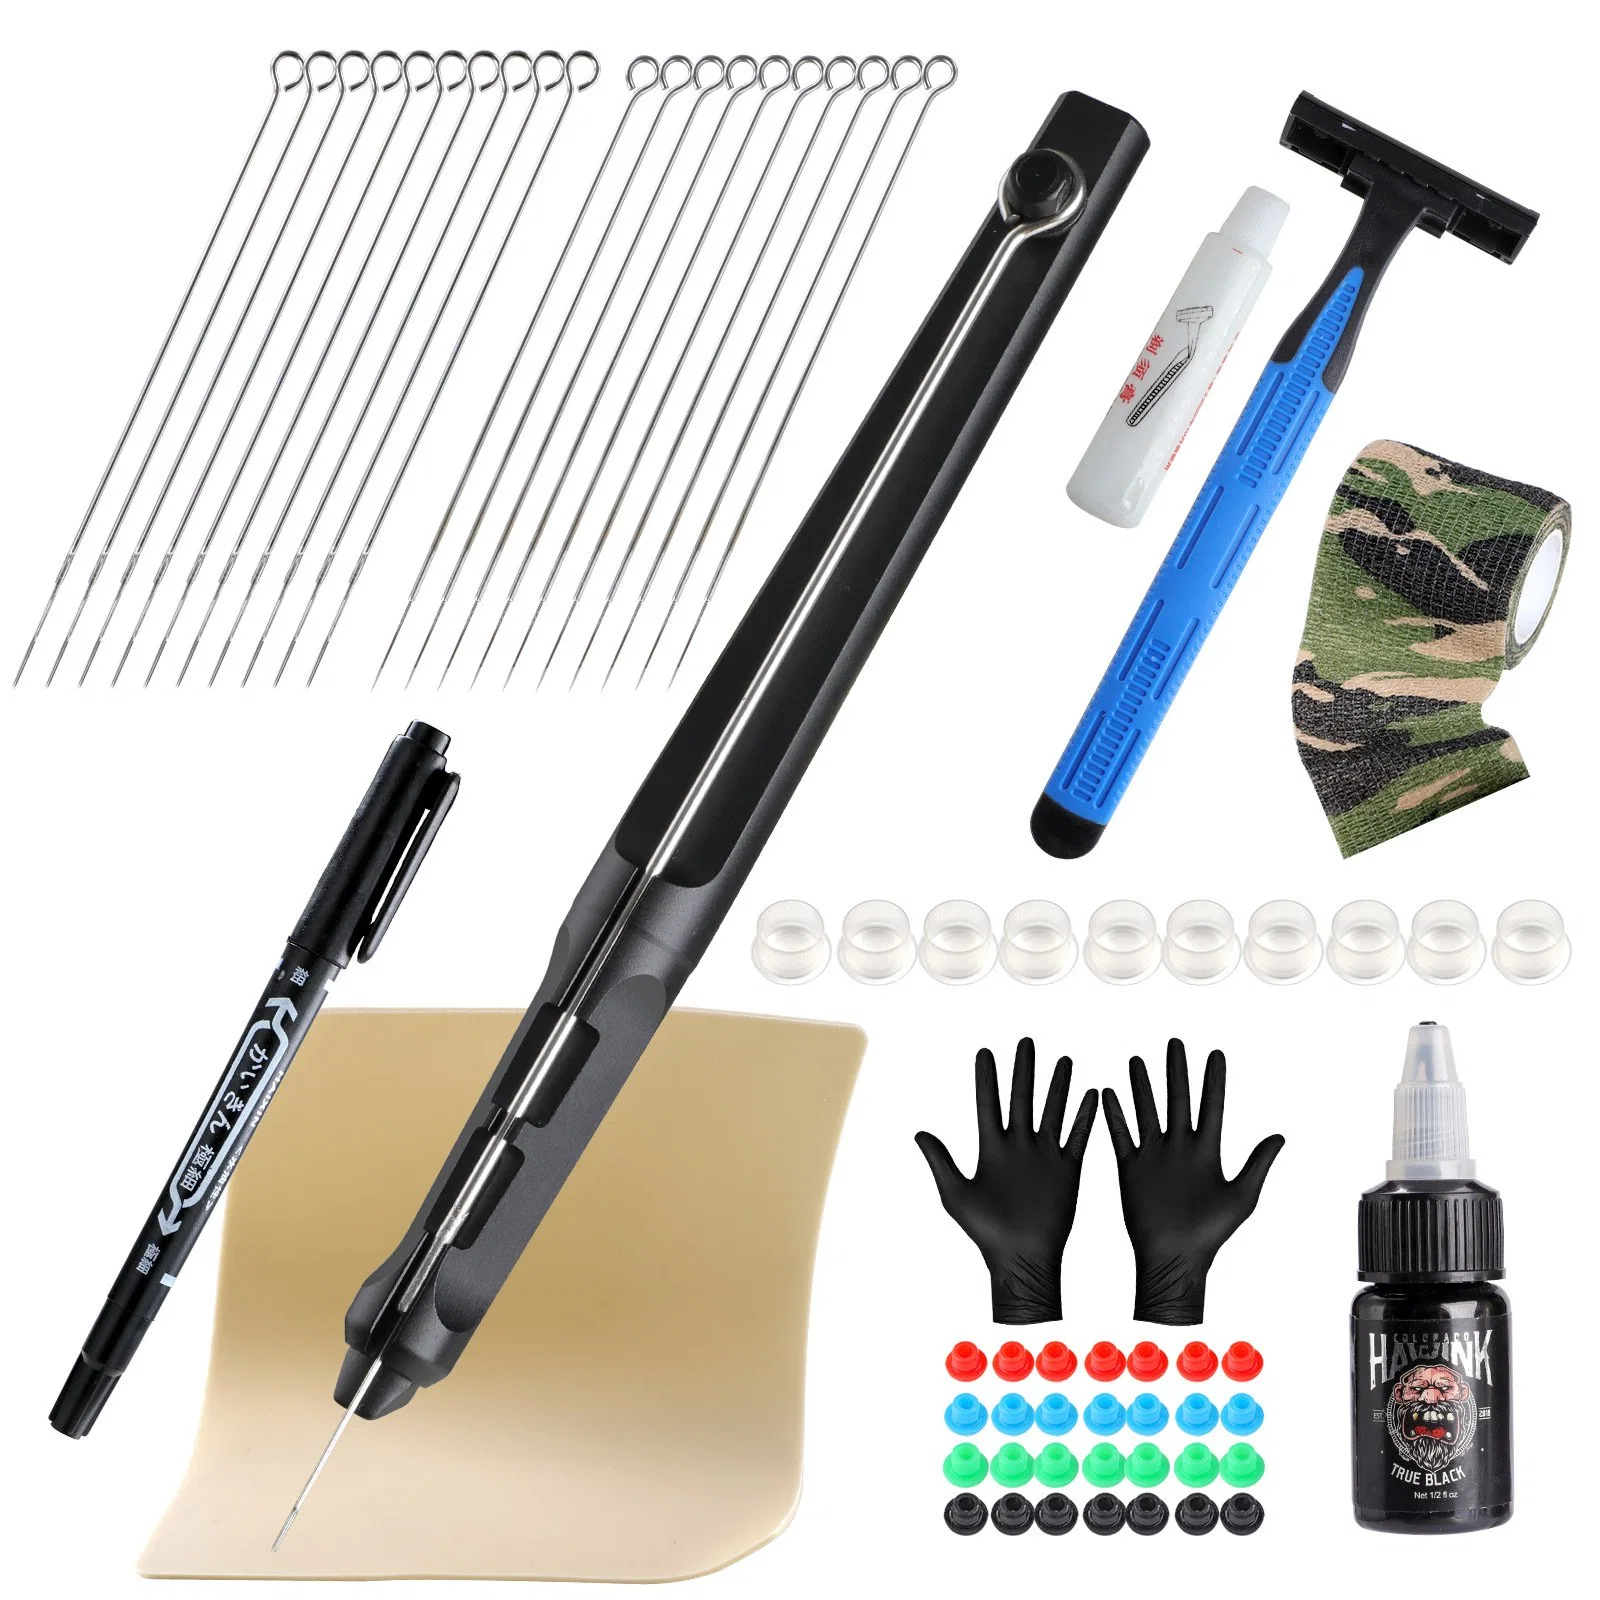 Black Traditional Tattoo Hand Needle Kit with Ink Needles Accessories Set for Body Art Hand Poke Stick Tattoo Beginner Practice